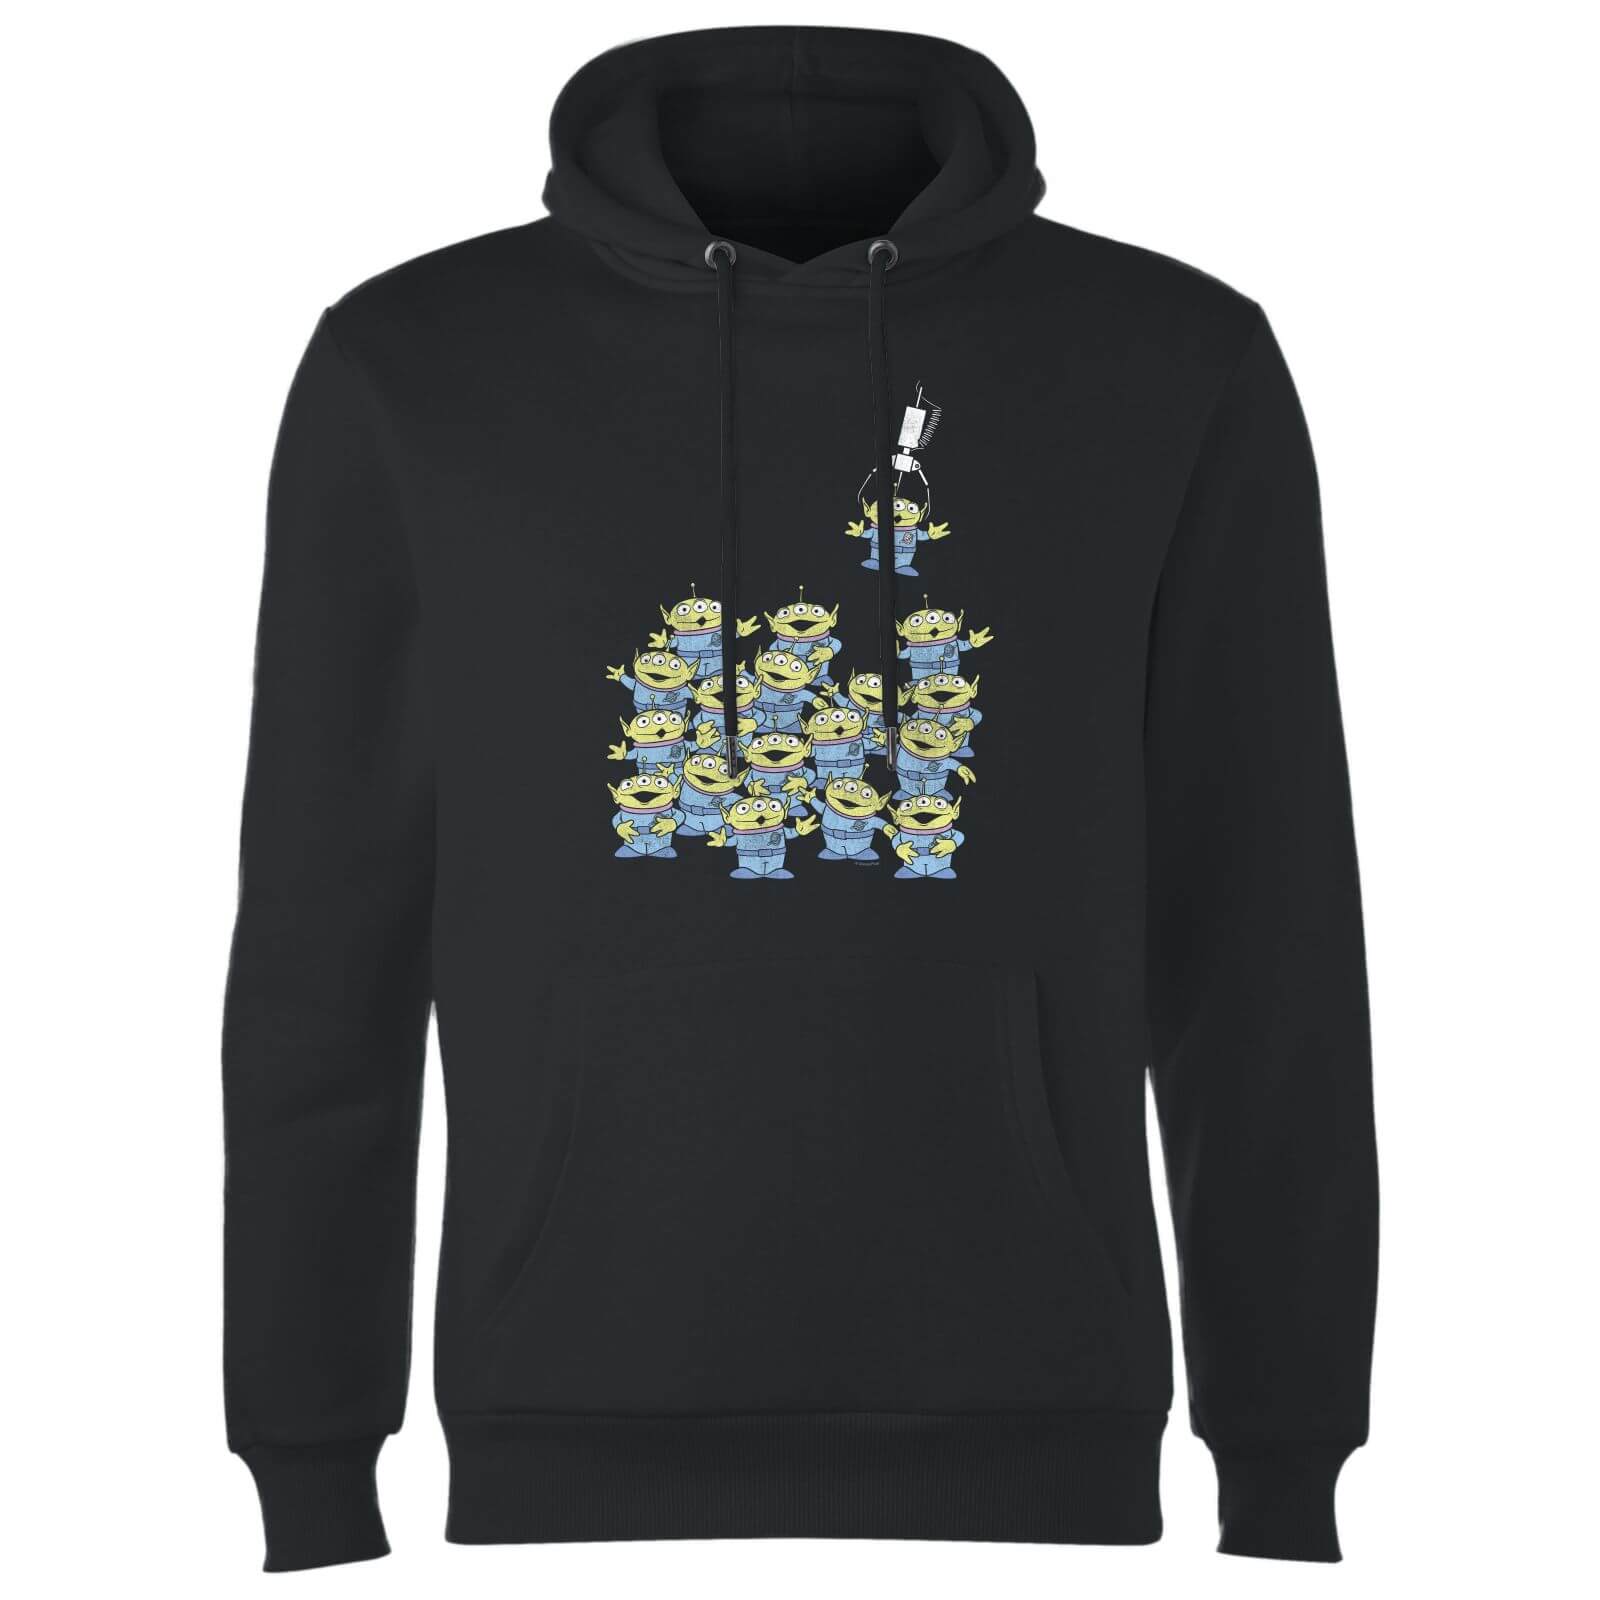 Toy Story The Claw Hoodie - Black - S